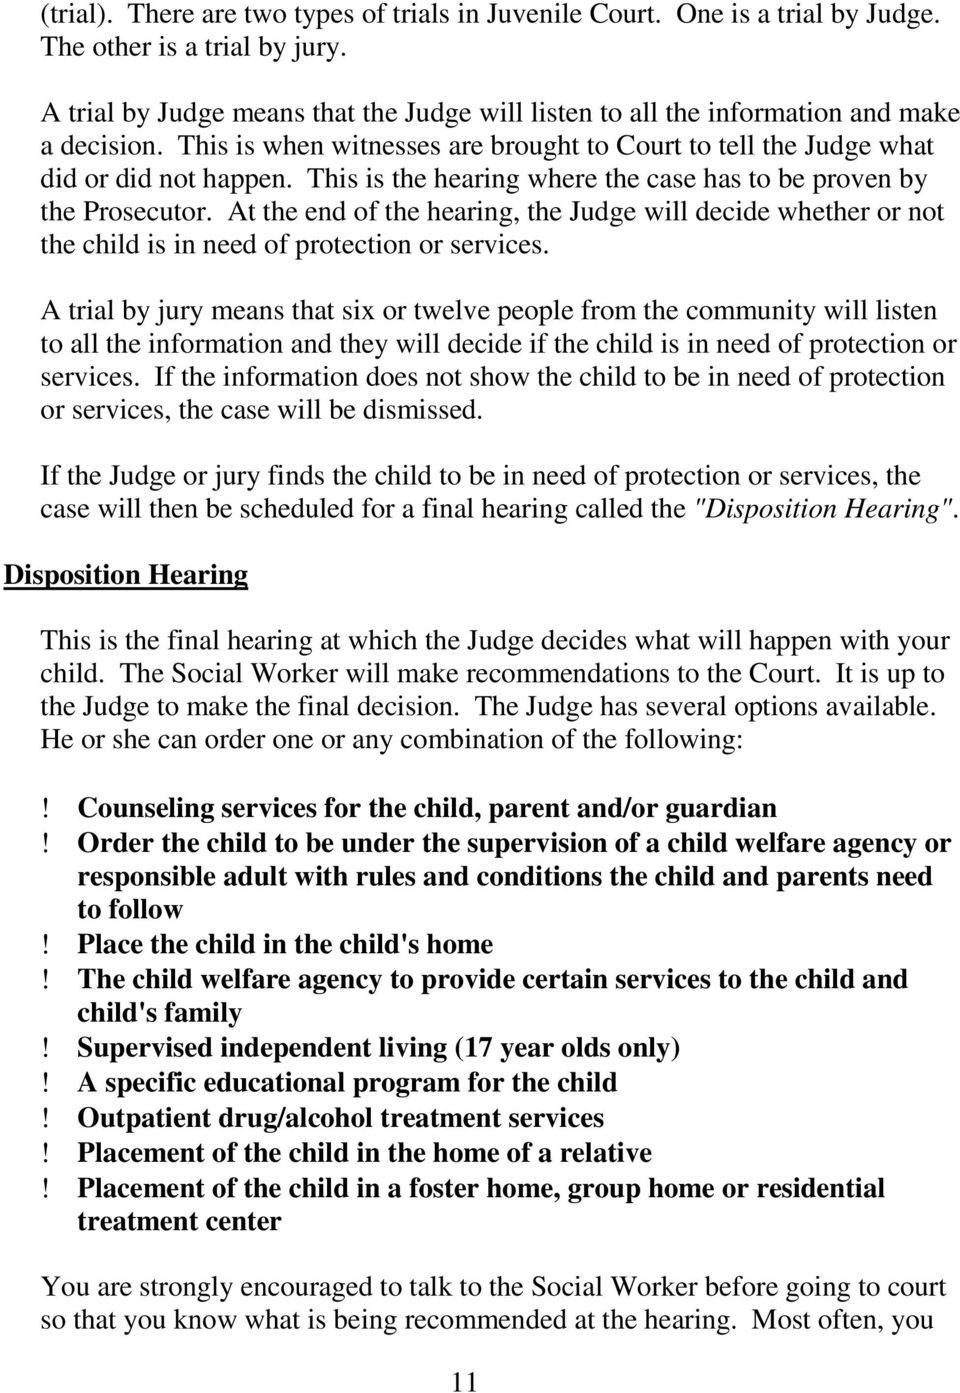 At the end of the hearing, the Judge will decide whether or not the child is in need of protection or services.